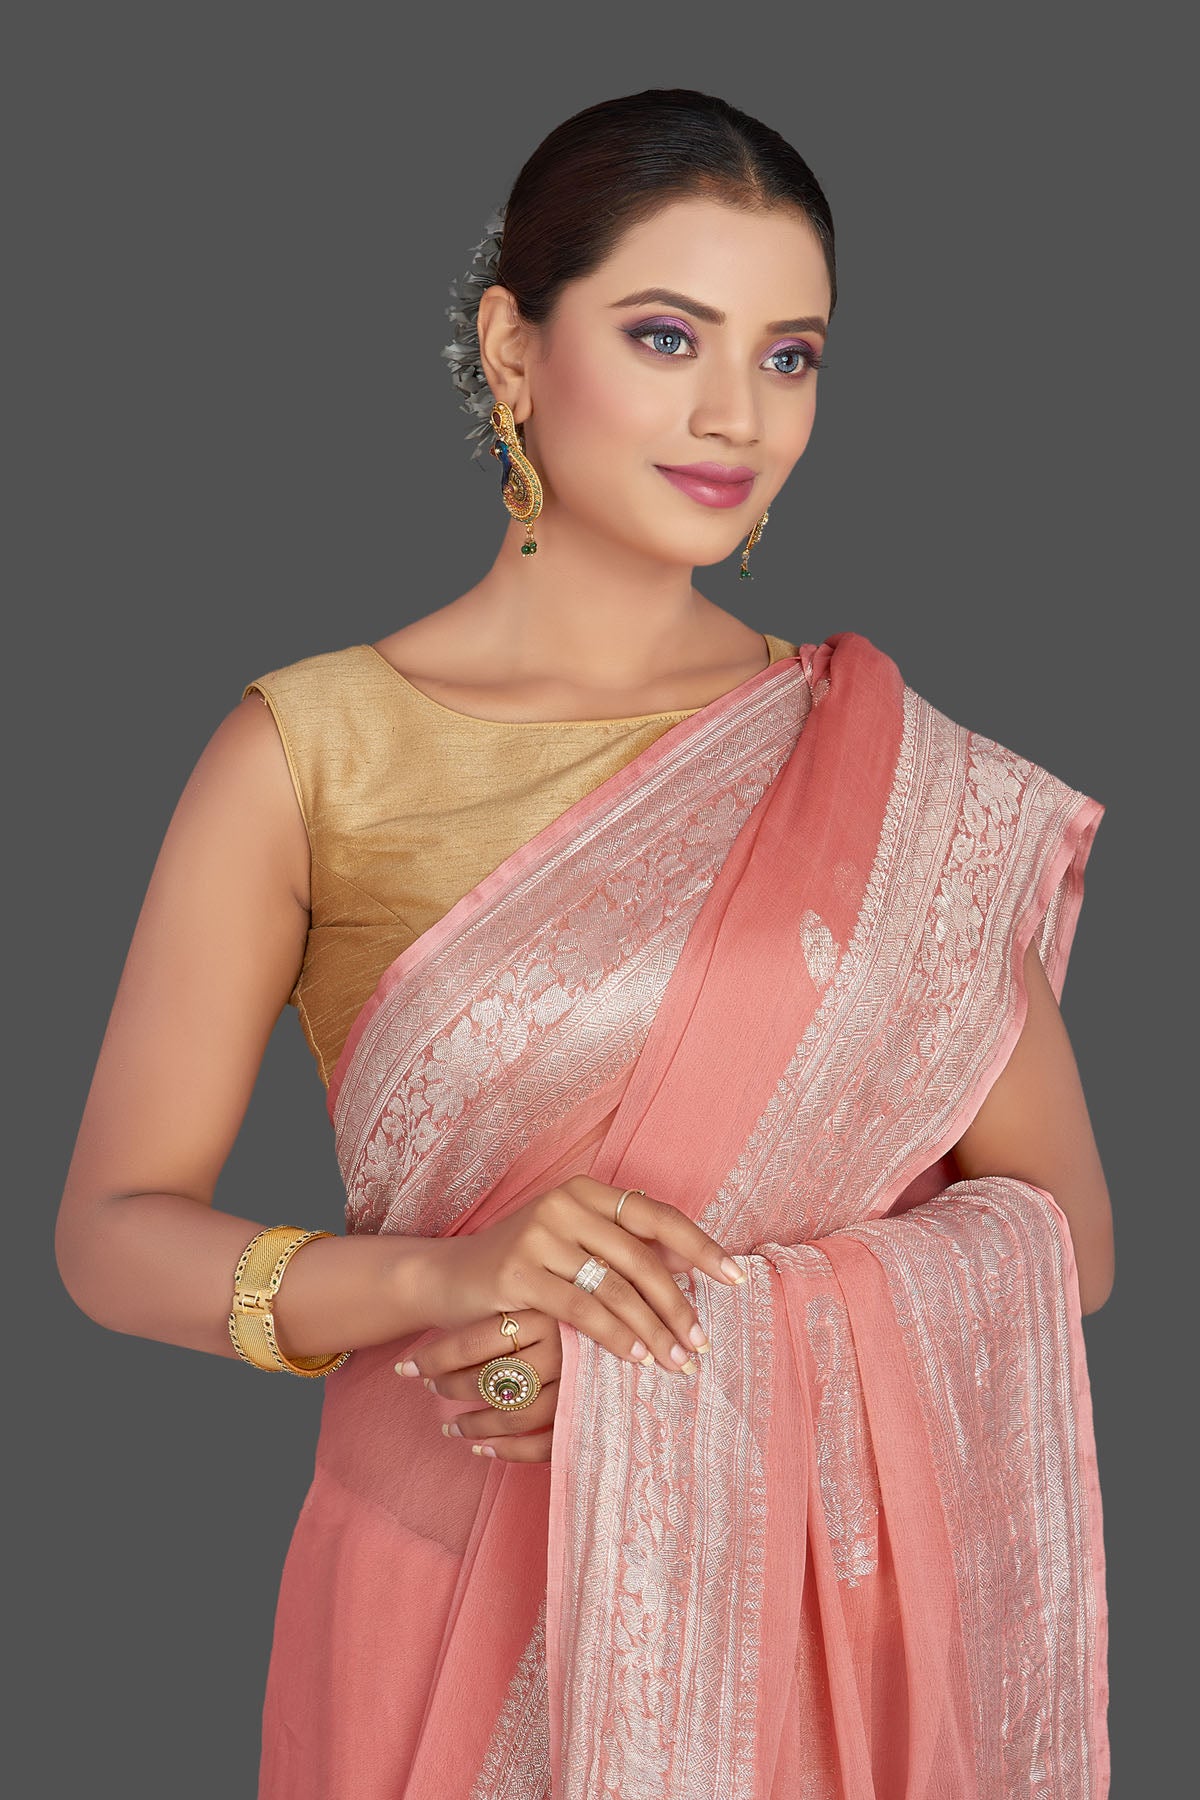 Buy beautiful light pink chiffon georgette saree online in USA with silver zari border. Look your best on special occasions with stunning Banarasi sarees, pure silk saris, tussar saris, handwoven sarees from Pure Elegance Indian saree store in USA.-closeup